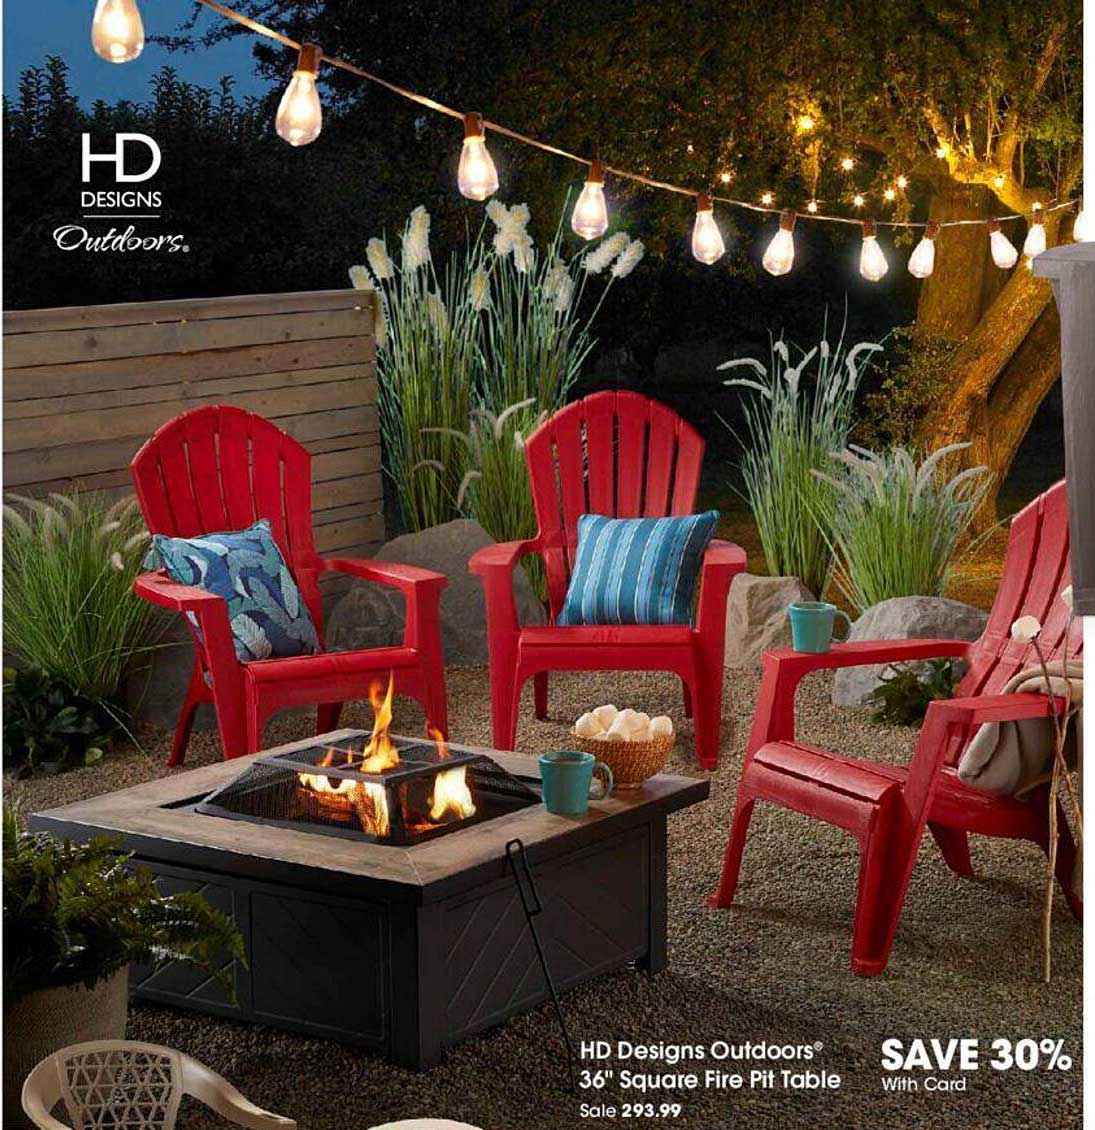 Fred Meyer Hd Designs Outdoors 36